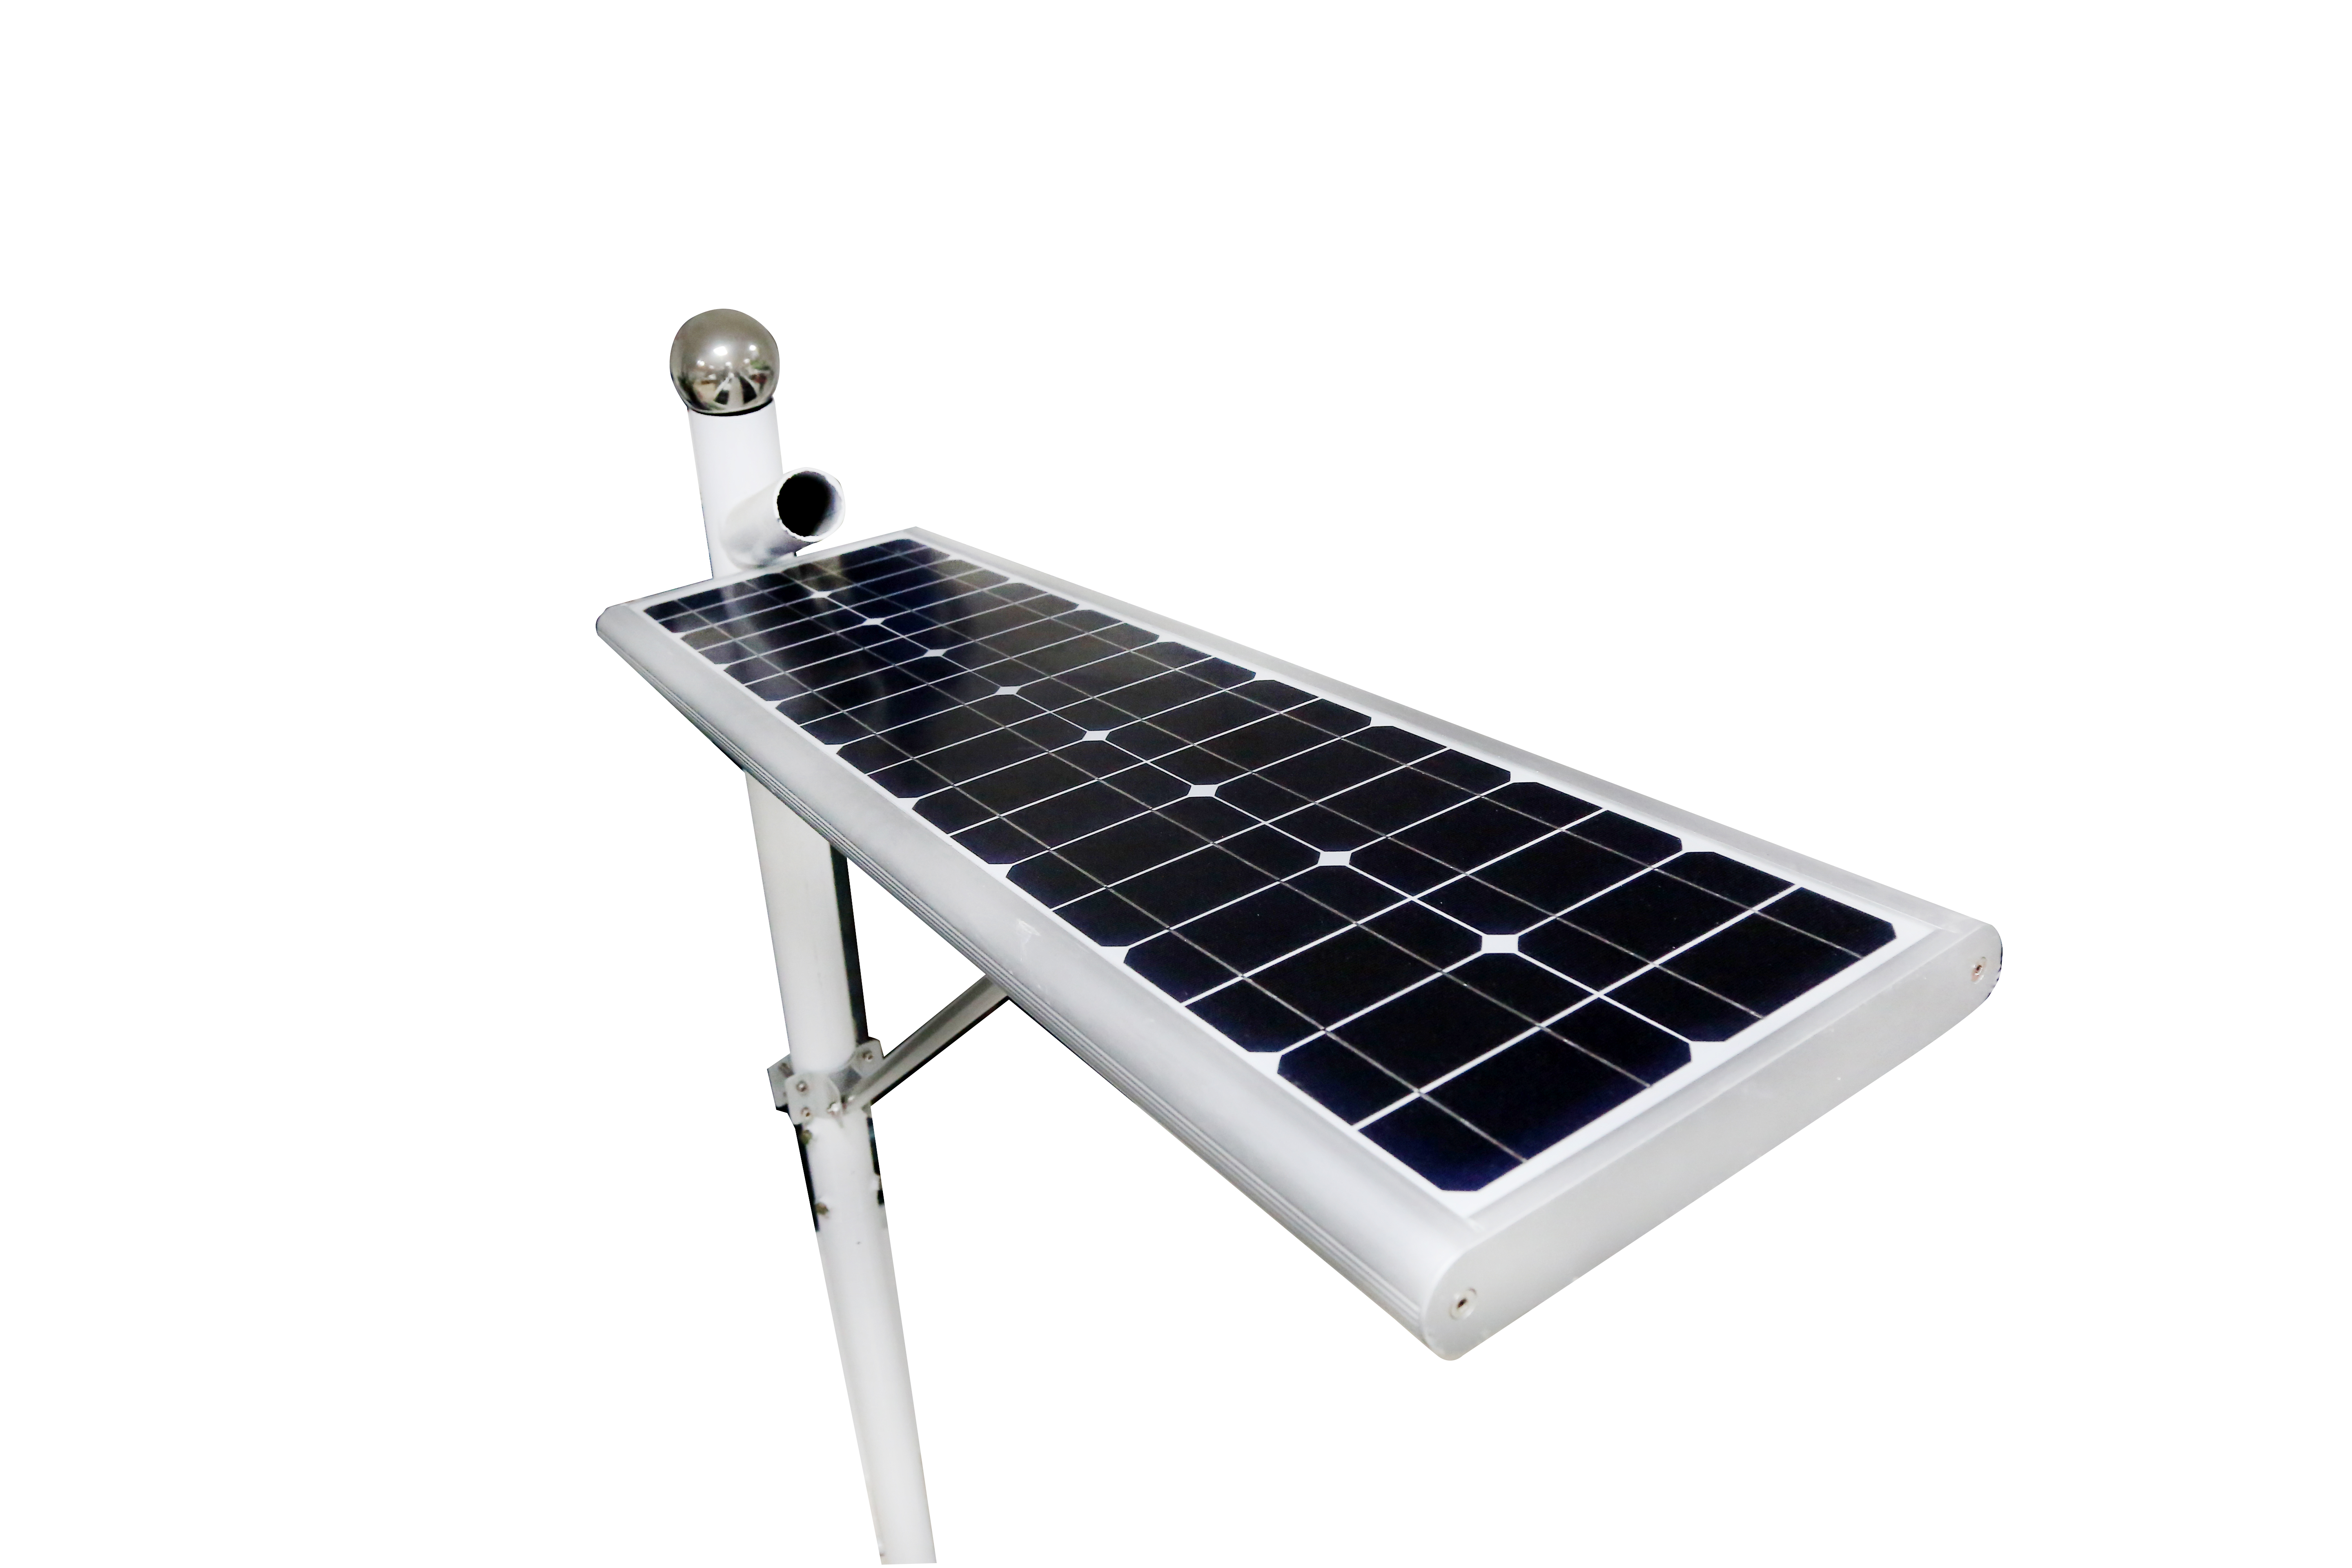 Are there have strokes when you purchase solar powered led street light?